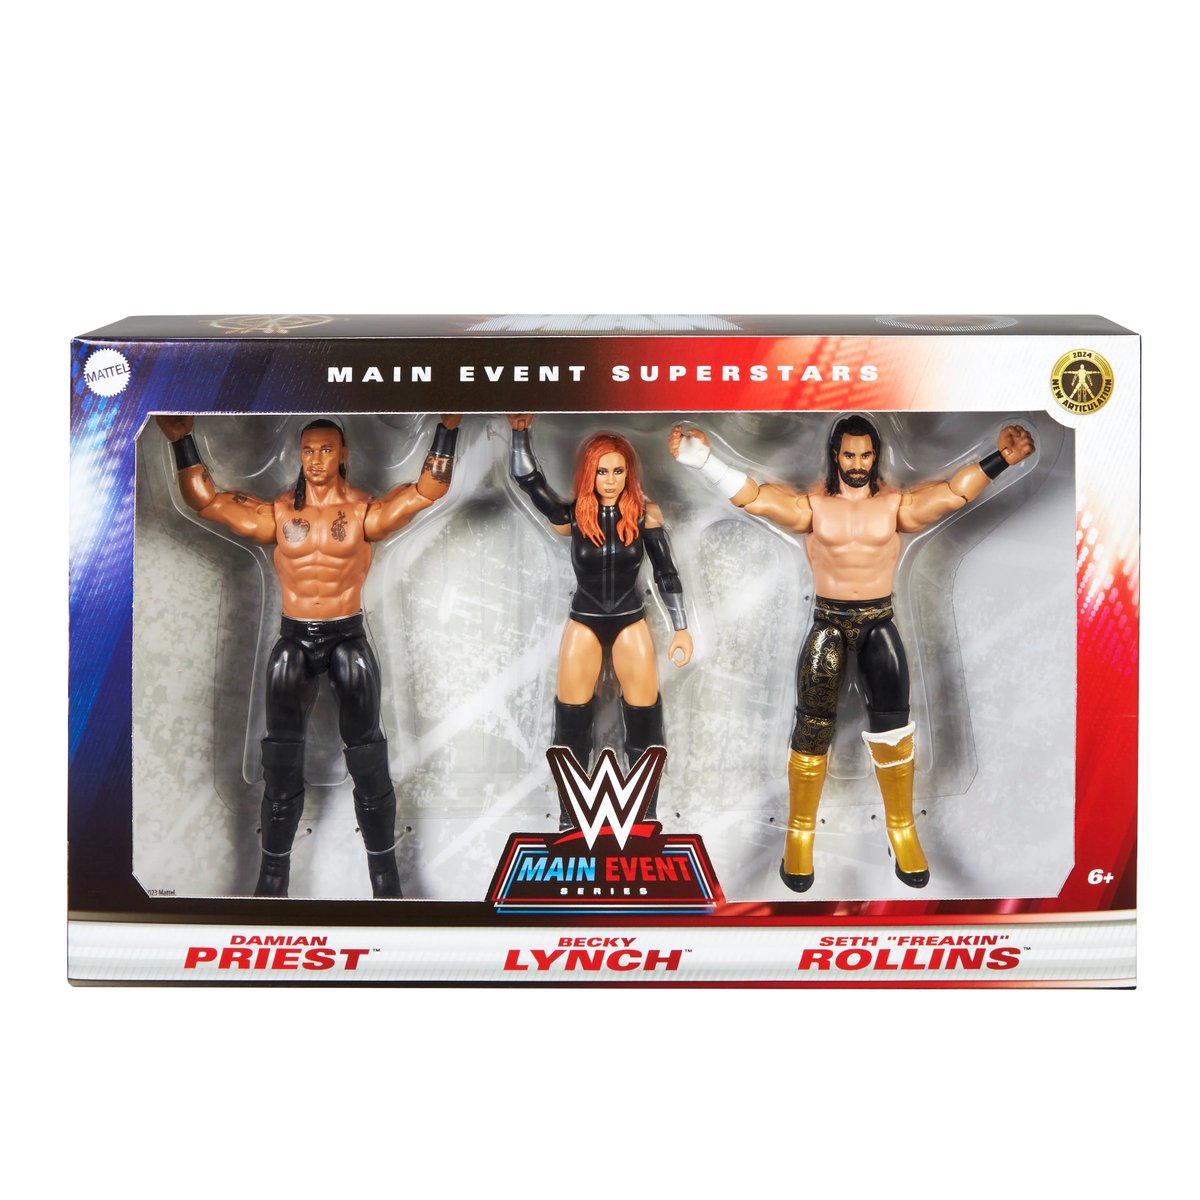 JUST ADDED: Mattel WWE Elite, Ultimate, Superstars & Main Event reveals for April 2024! All official pics, including some not-yet-widely-seen products and new MOC images for some those you’ve seen before! Hit the main page of the site to see them all. ENJOY!